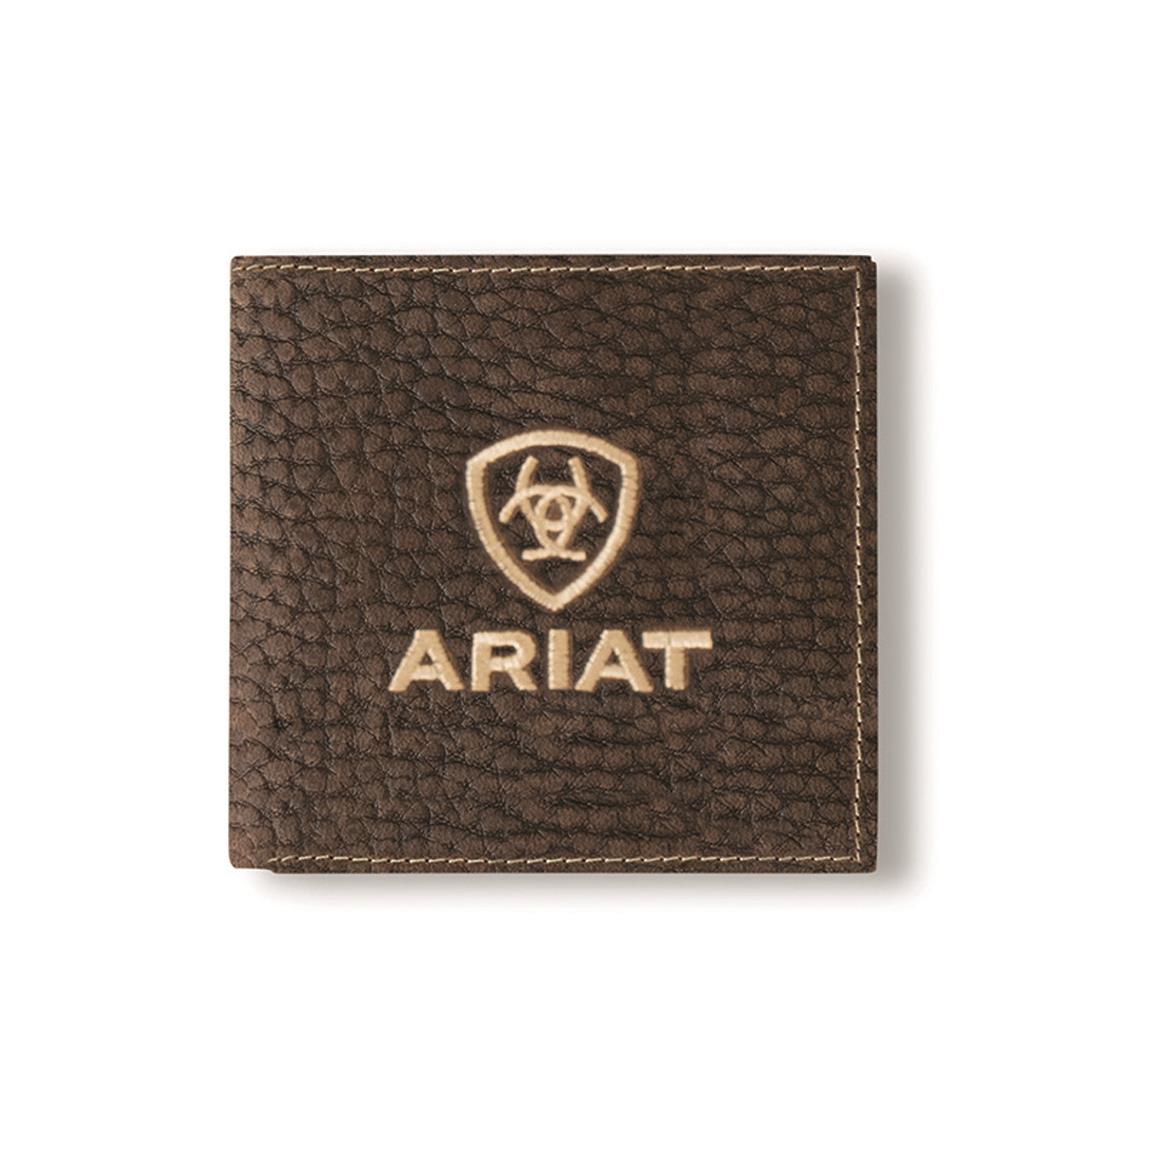 Ariat Pebble Leather Bifold Wallet, Brown